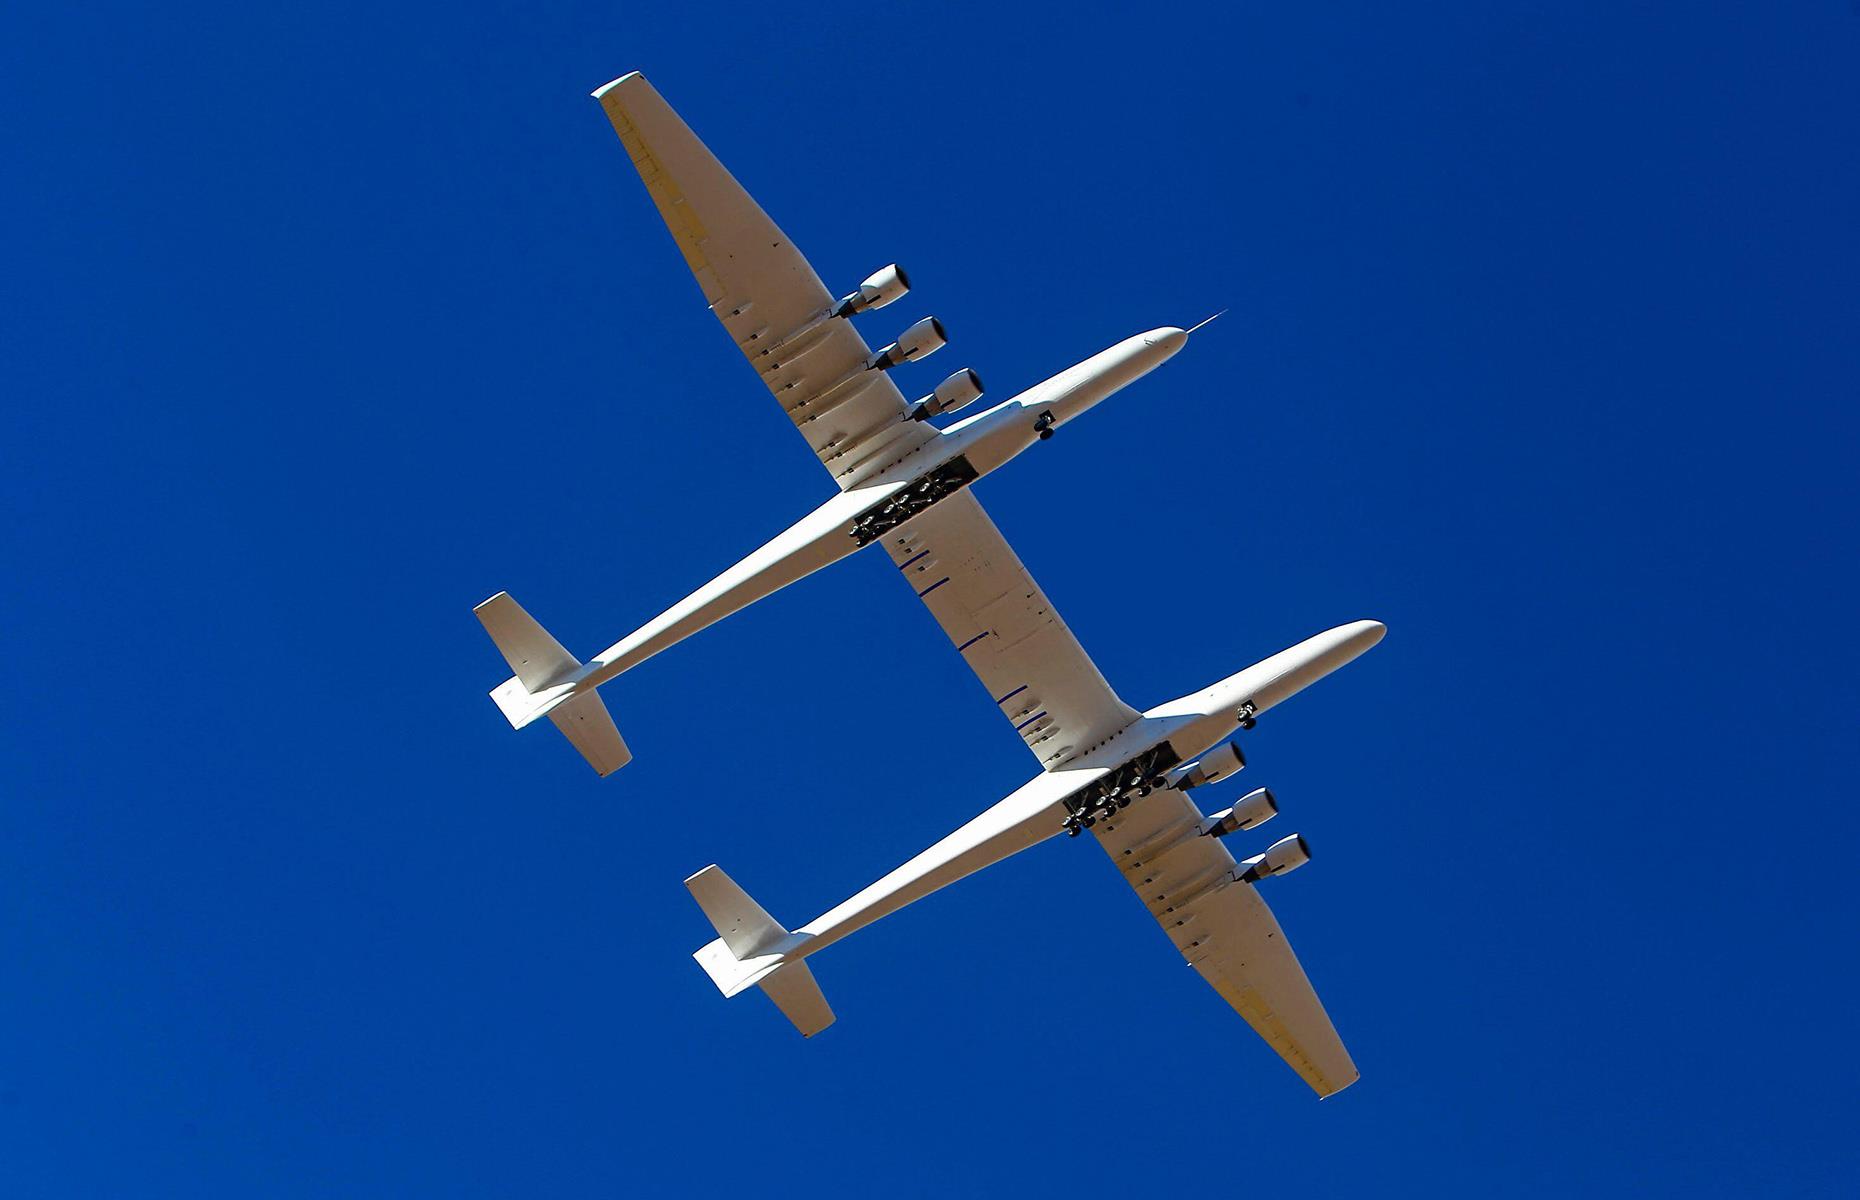 <p>The Stratolaunch completed its first flight in 2019 – a two-and-a-half-hour test flight above the Mojave Desert watched by a cheering crowd – and is edging ever closer to its goal of launching a rocket mid-air. In December 2023, the Stratolaunch completed its first test flight with a Talon-A hypersonic vehicle as its payload – its 12th flight overall, lasting three hours and 22 minutes.</p>  <p><strong>Liked this? Click on the Follow button above for more great stories from loveEXPLORING</strong></p>  <p><a href="https://www.loveexploring.com/gallerylist/86315/how-air-travel-has-changed-in-every-decade-from-the-1920s-to-today"><strong>Now discover how air travel changed in every decade from the 1920s to today</strong></a></p>